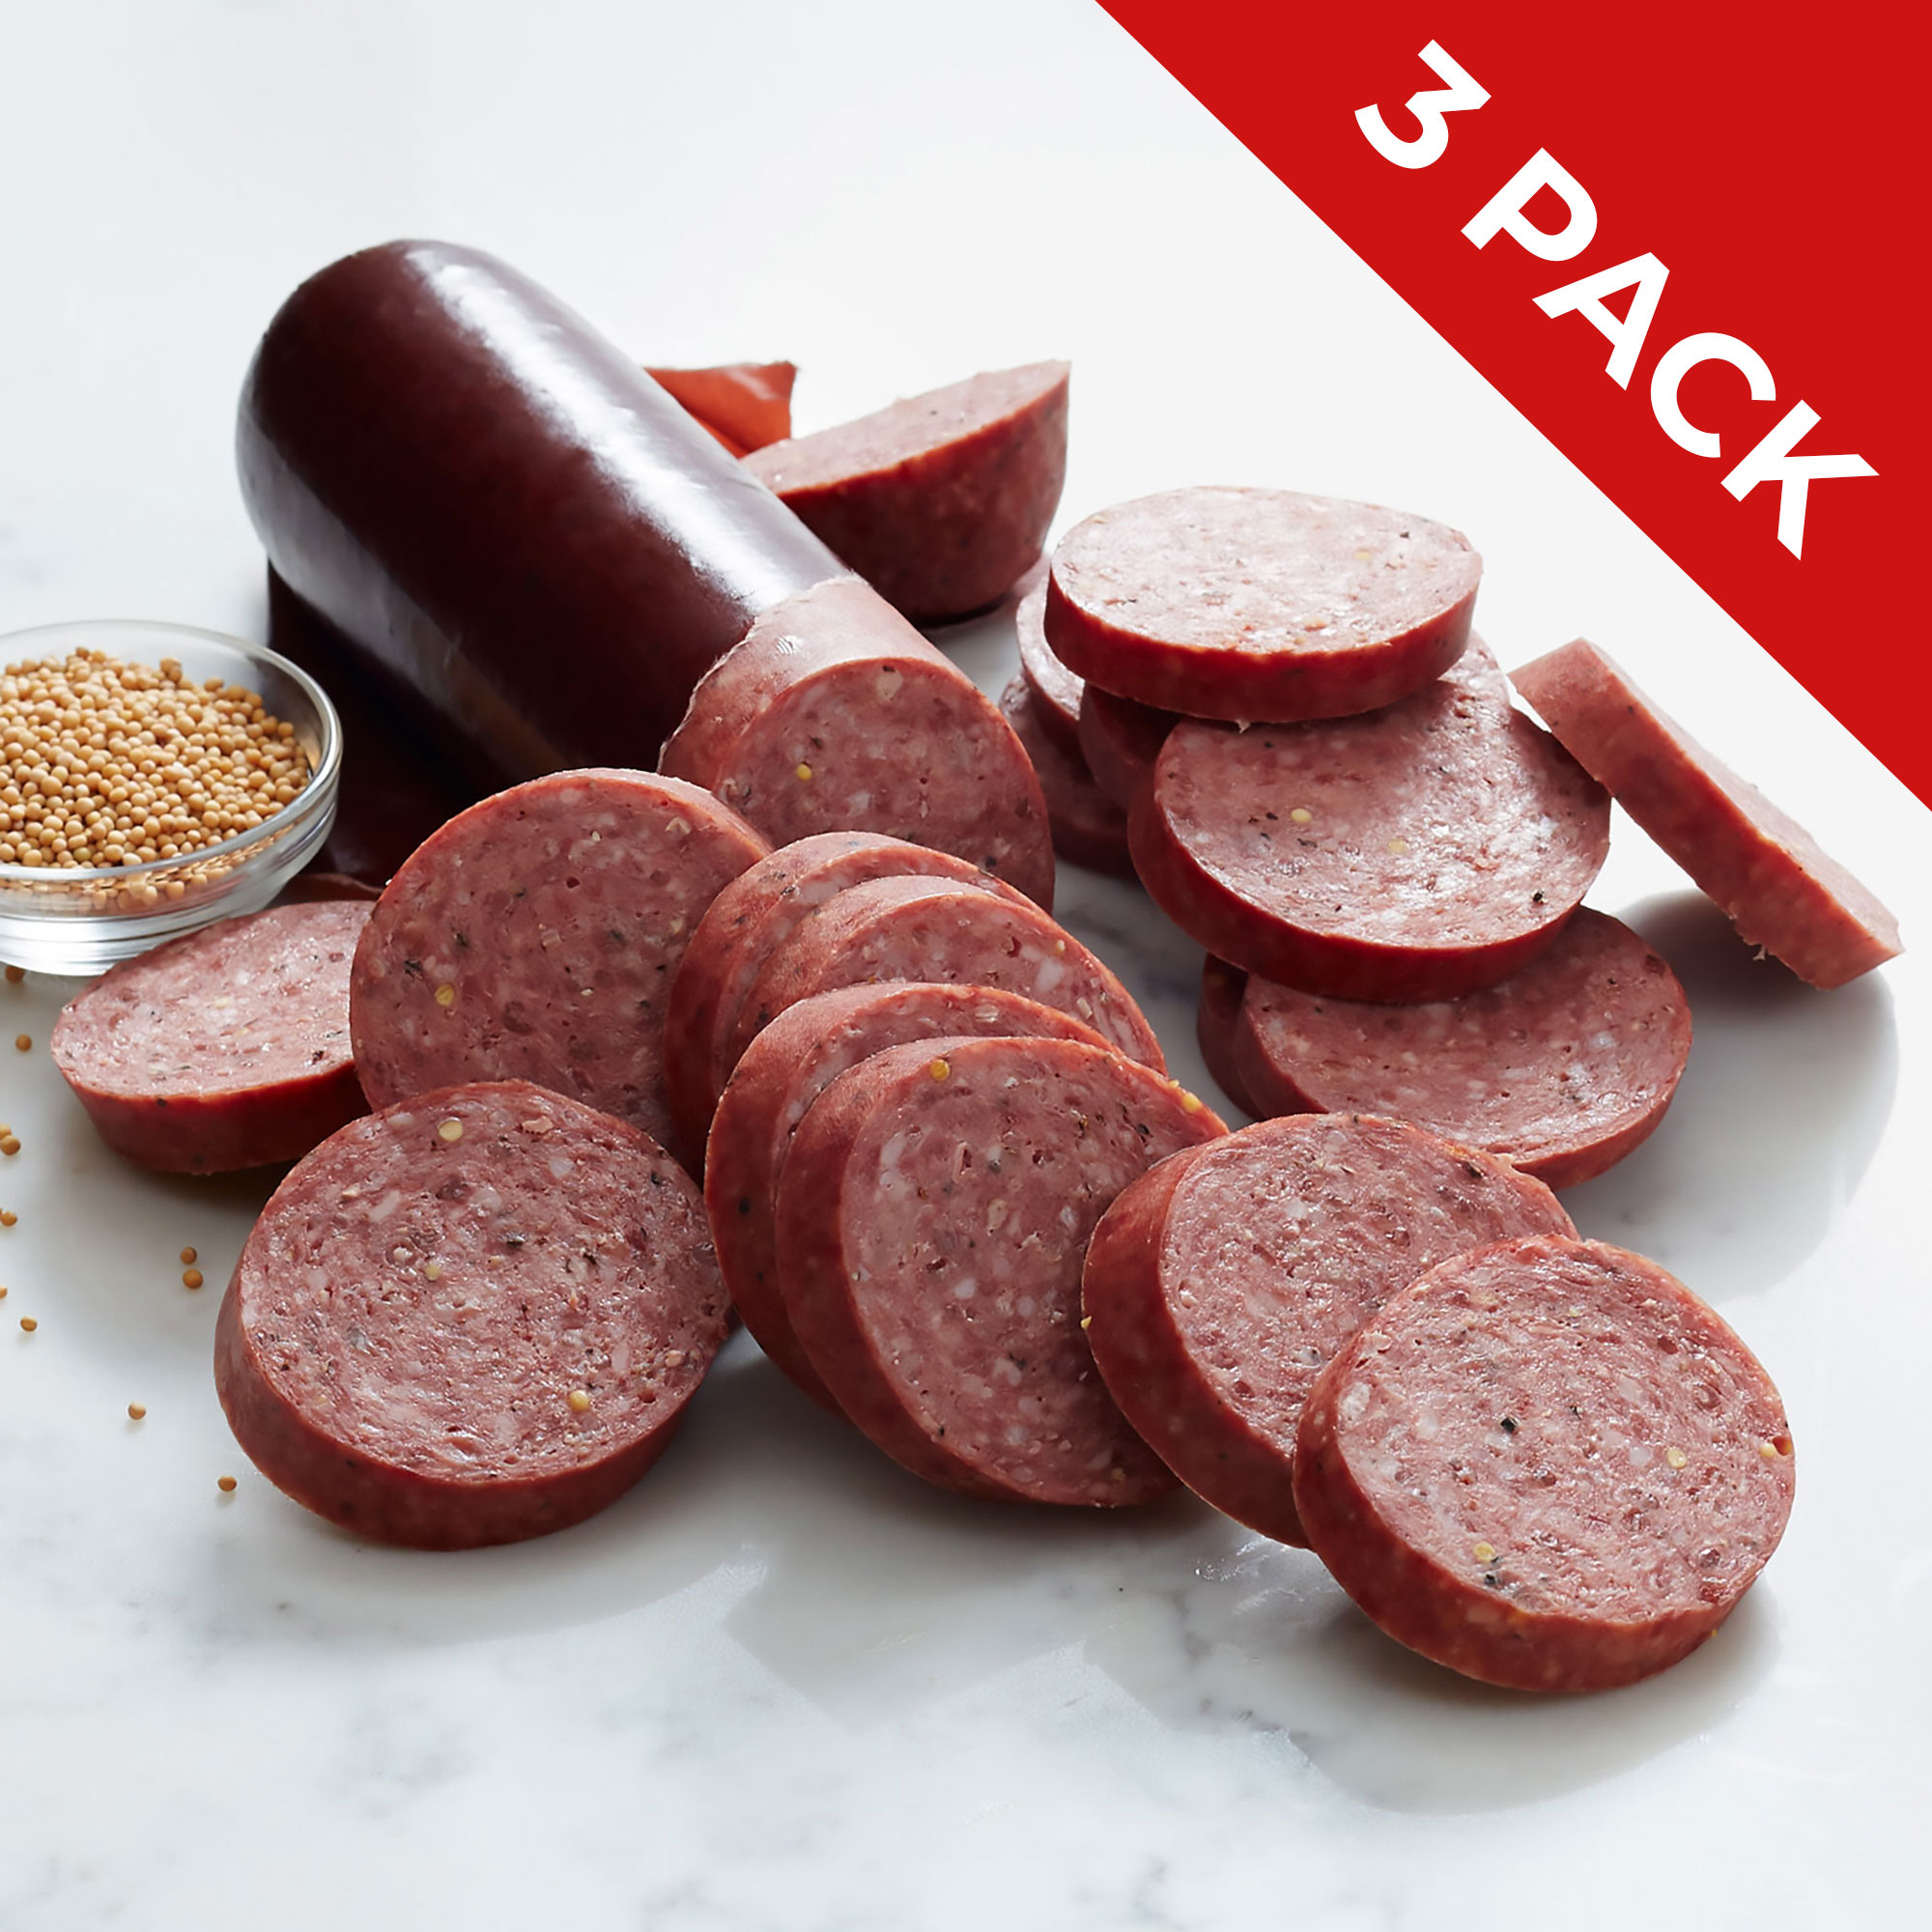 Hickory Farms Farmhouse Summer Sausage 10z Pack of 3